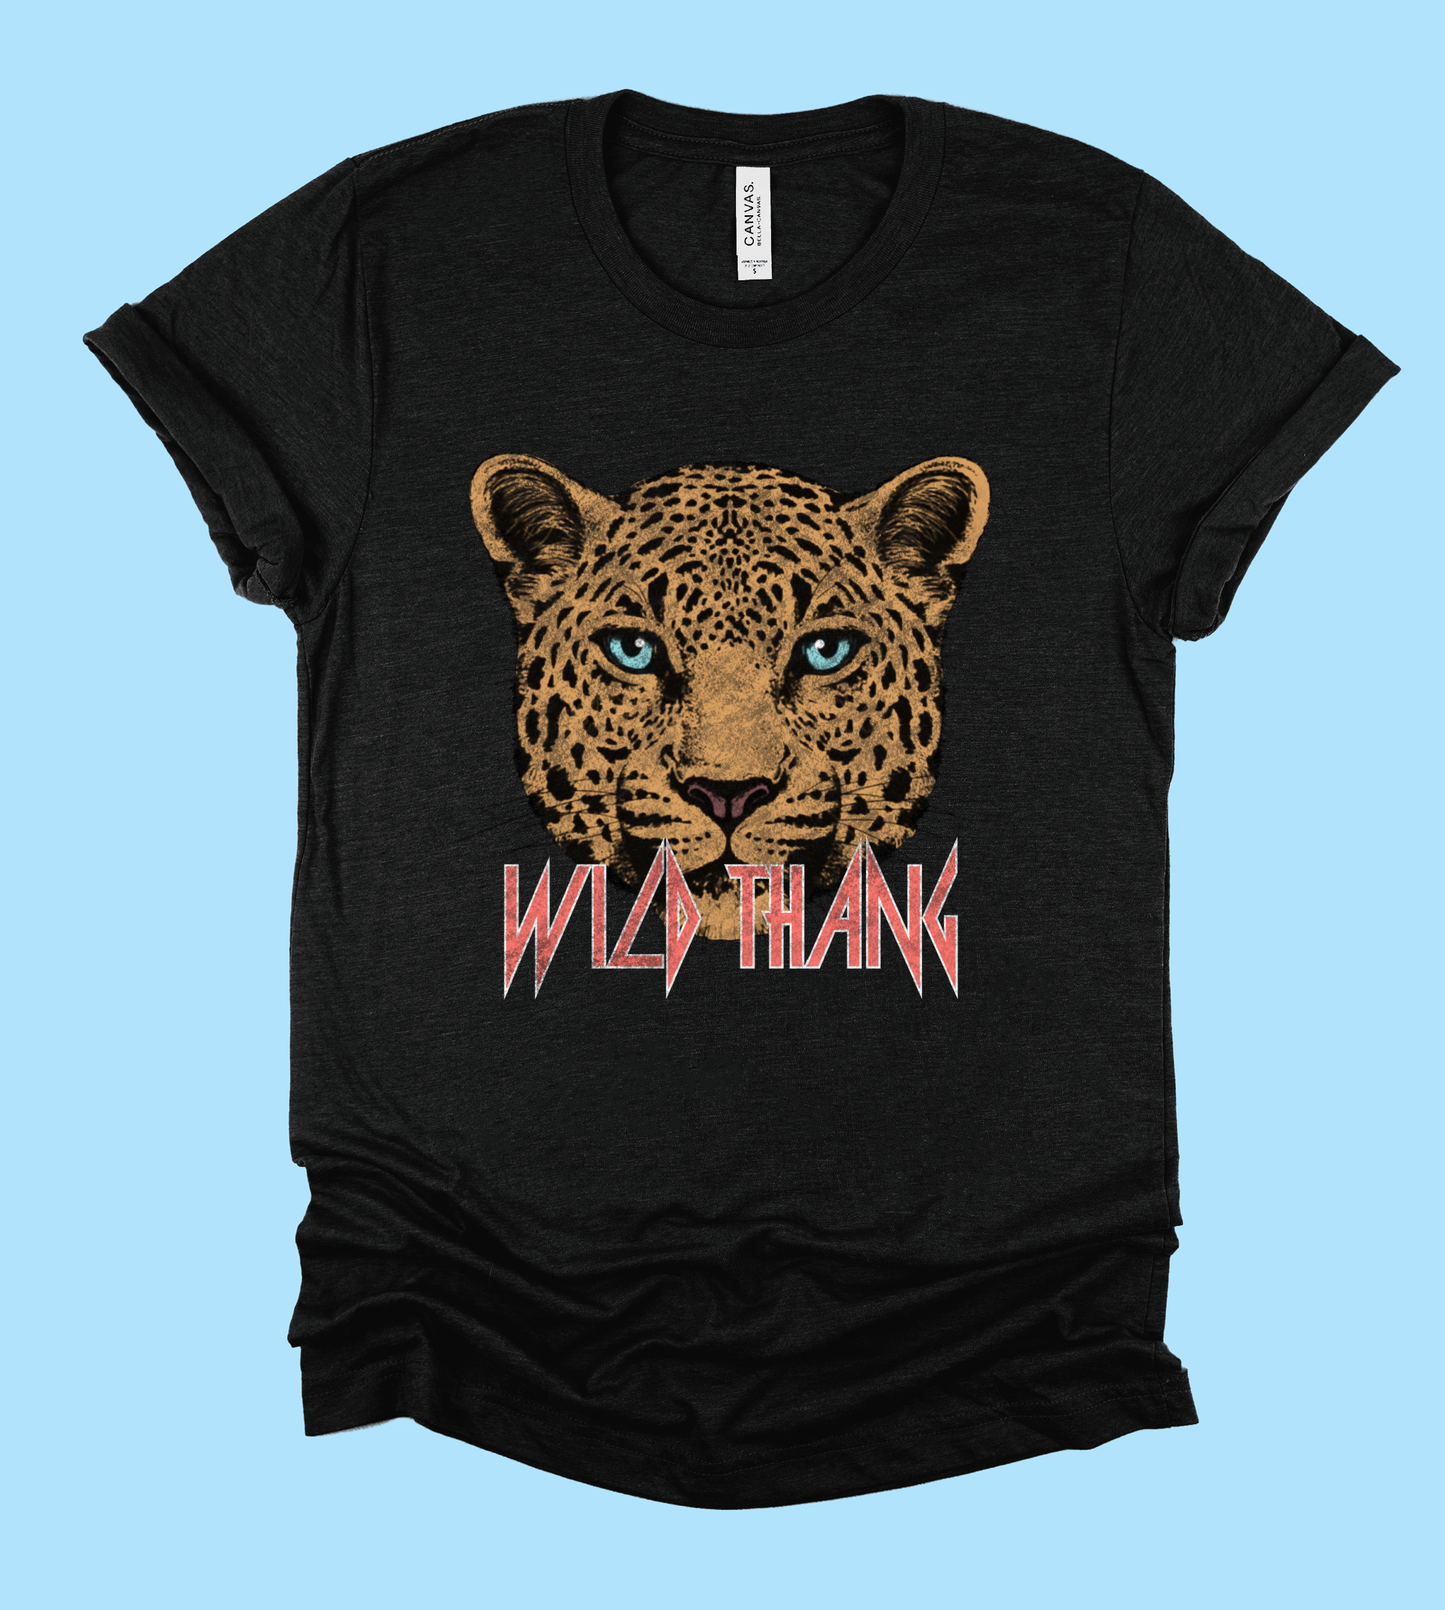 Soft Style Wild Thang Tee / Bella Canvas Shirts / Rocker Tees/ Rocker Tee/ Youth and Adult Sizes Available